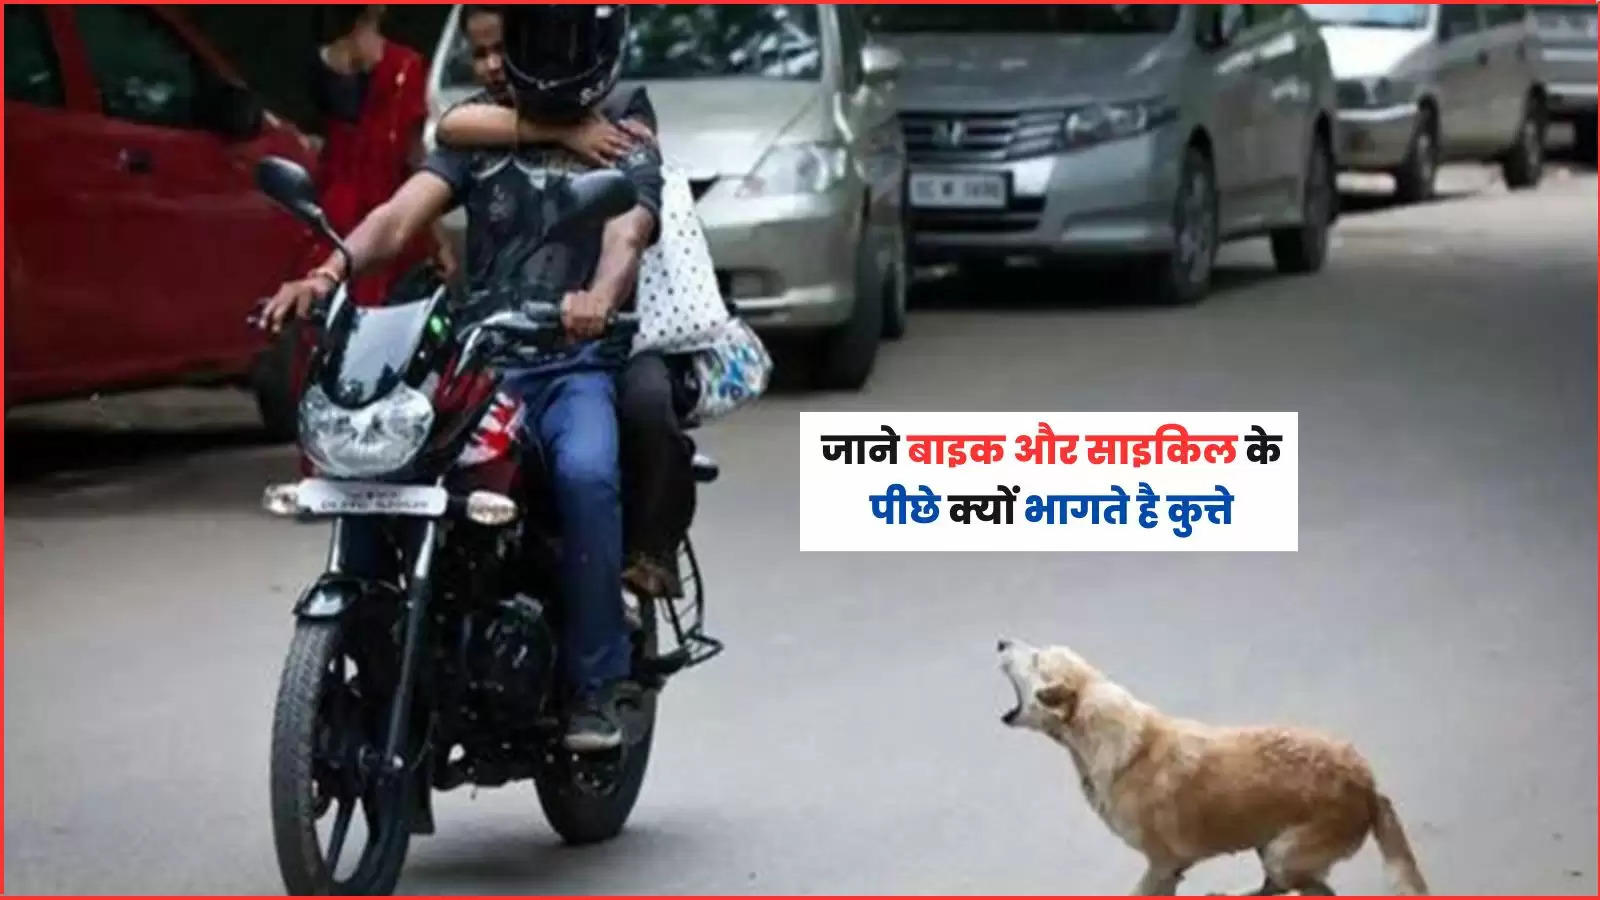 dog started barking to scooter rider